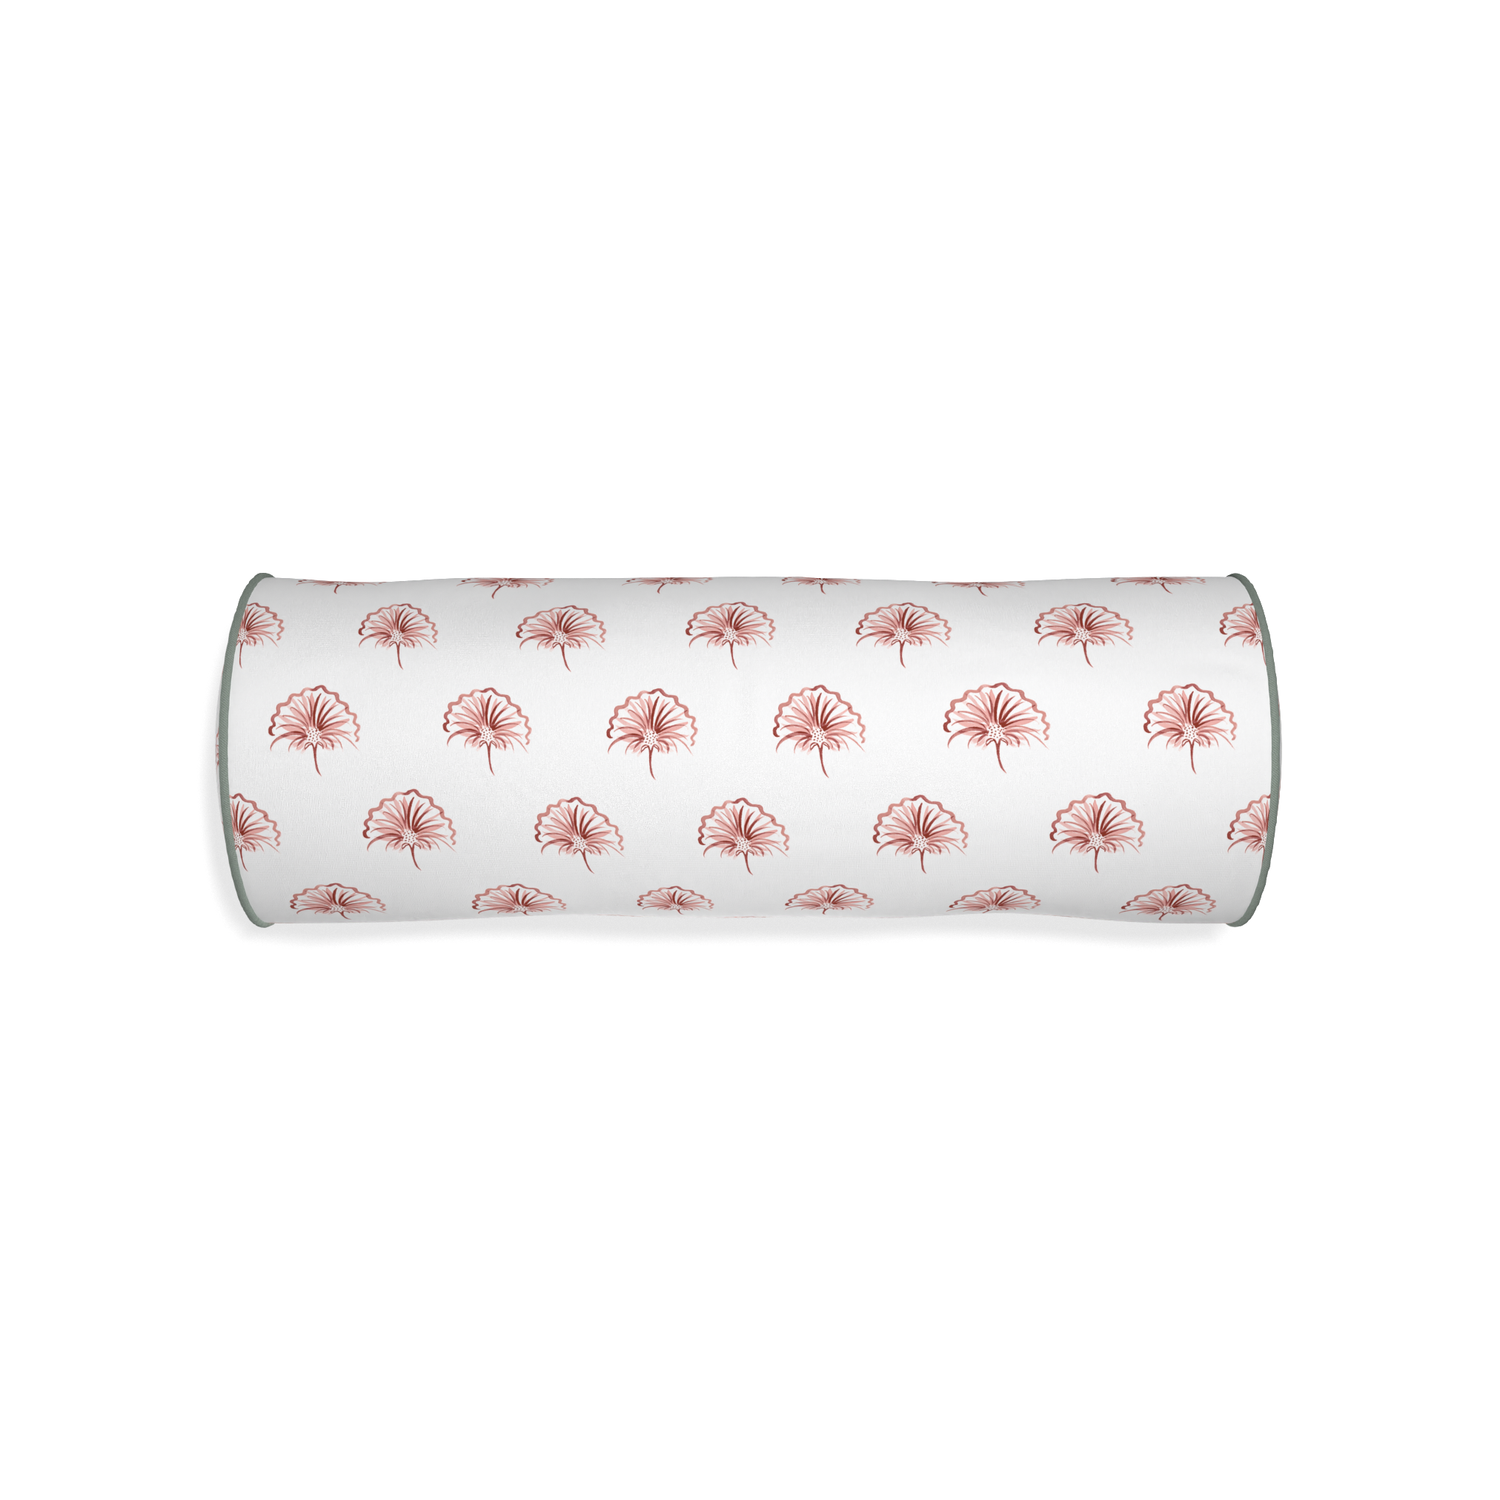 Bolster penelope rose custom floral pinkpillow with sage piping on white background